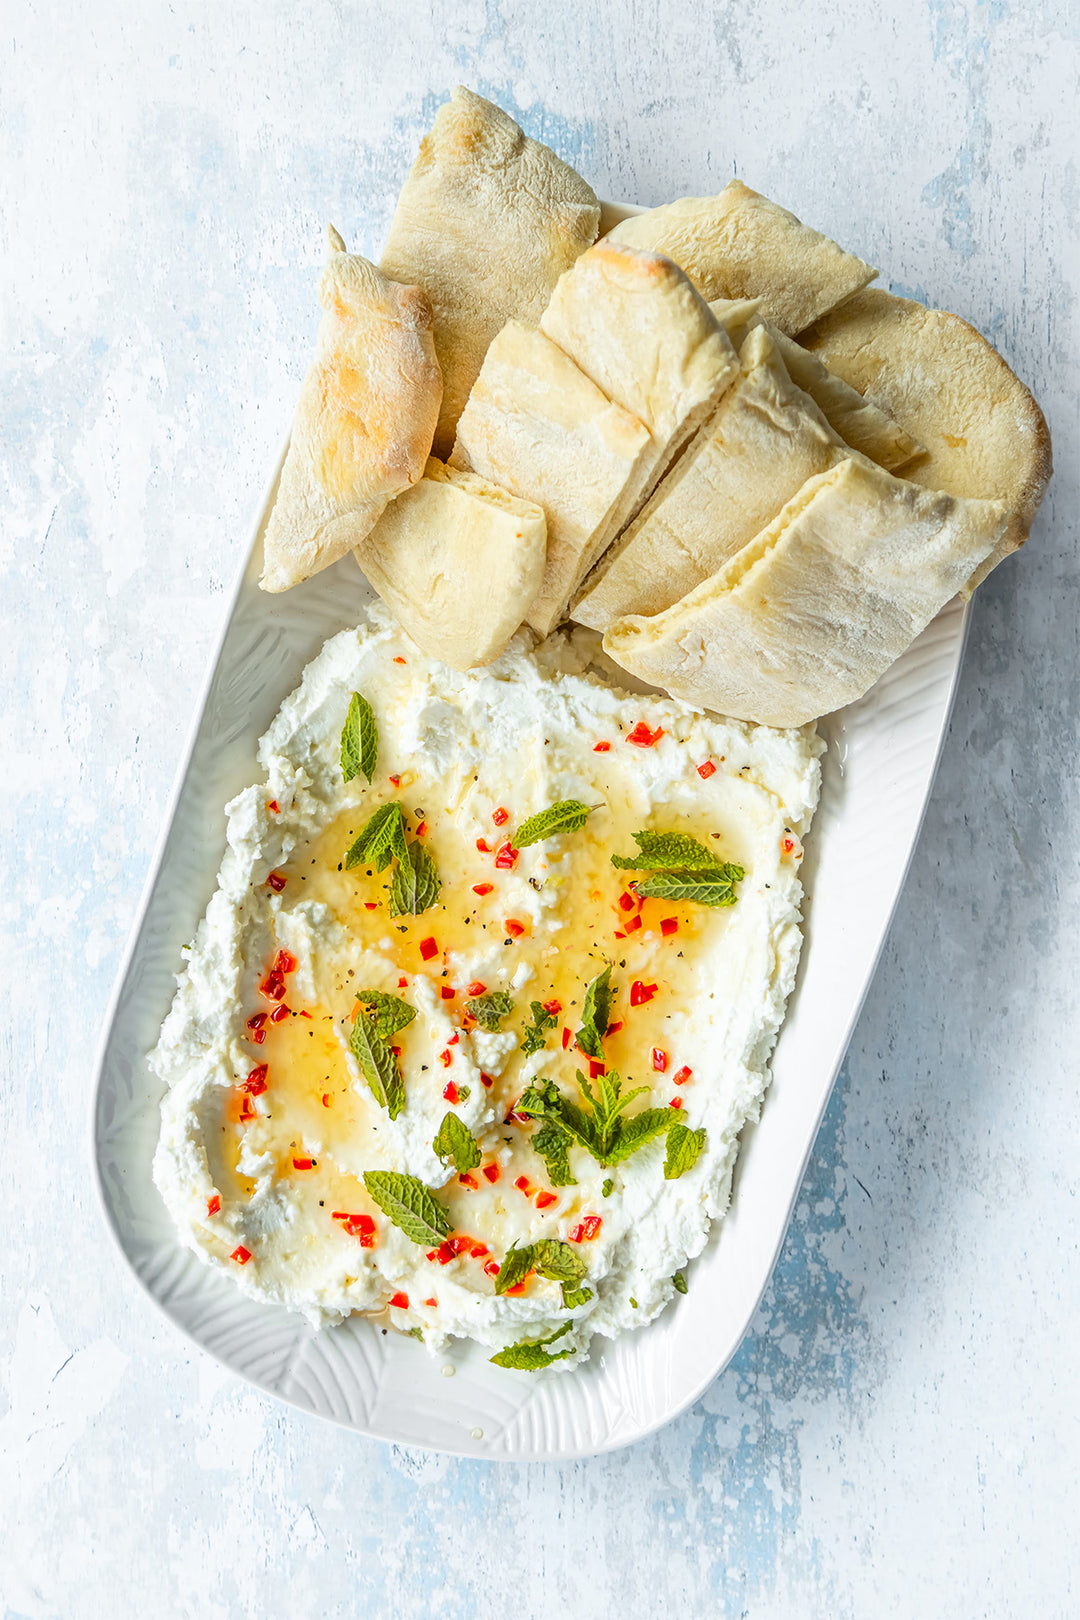 RECIPE OF THE WEEK: Flatbread with Spicy Honey Whipped Feta Dip